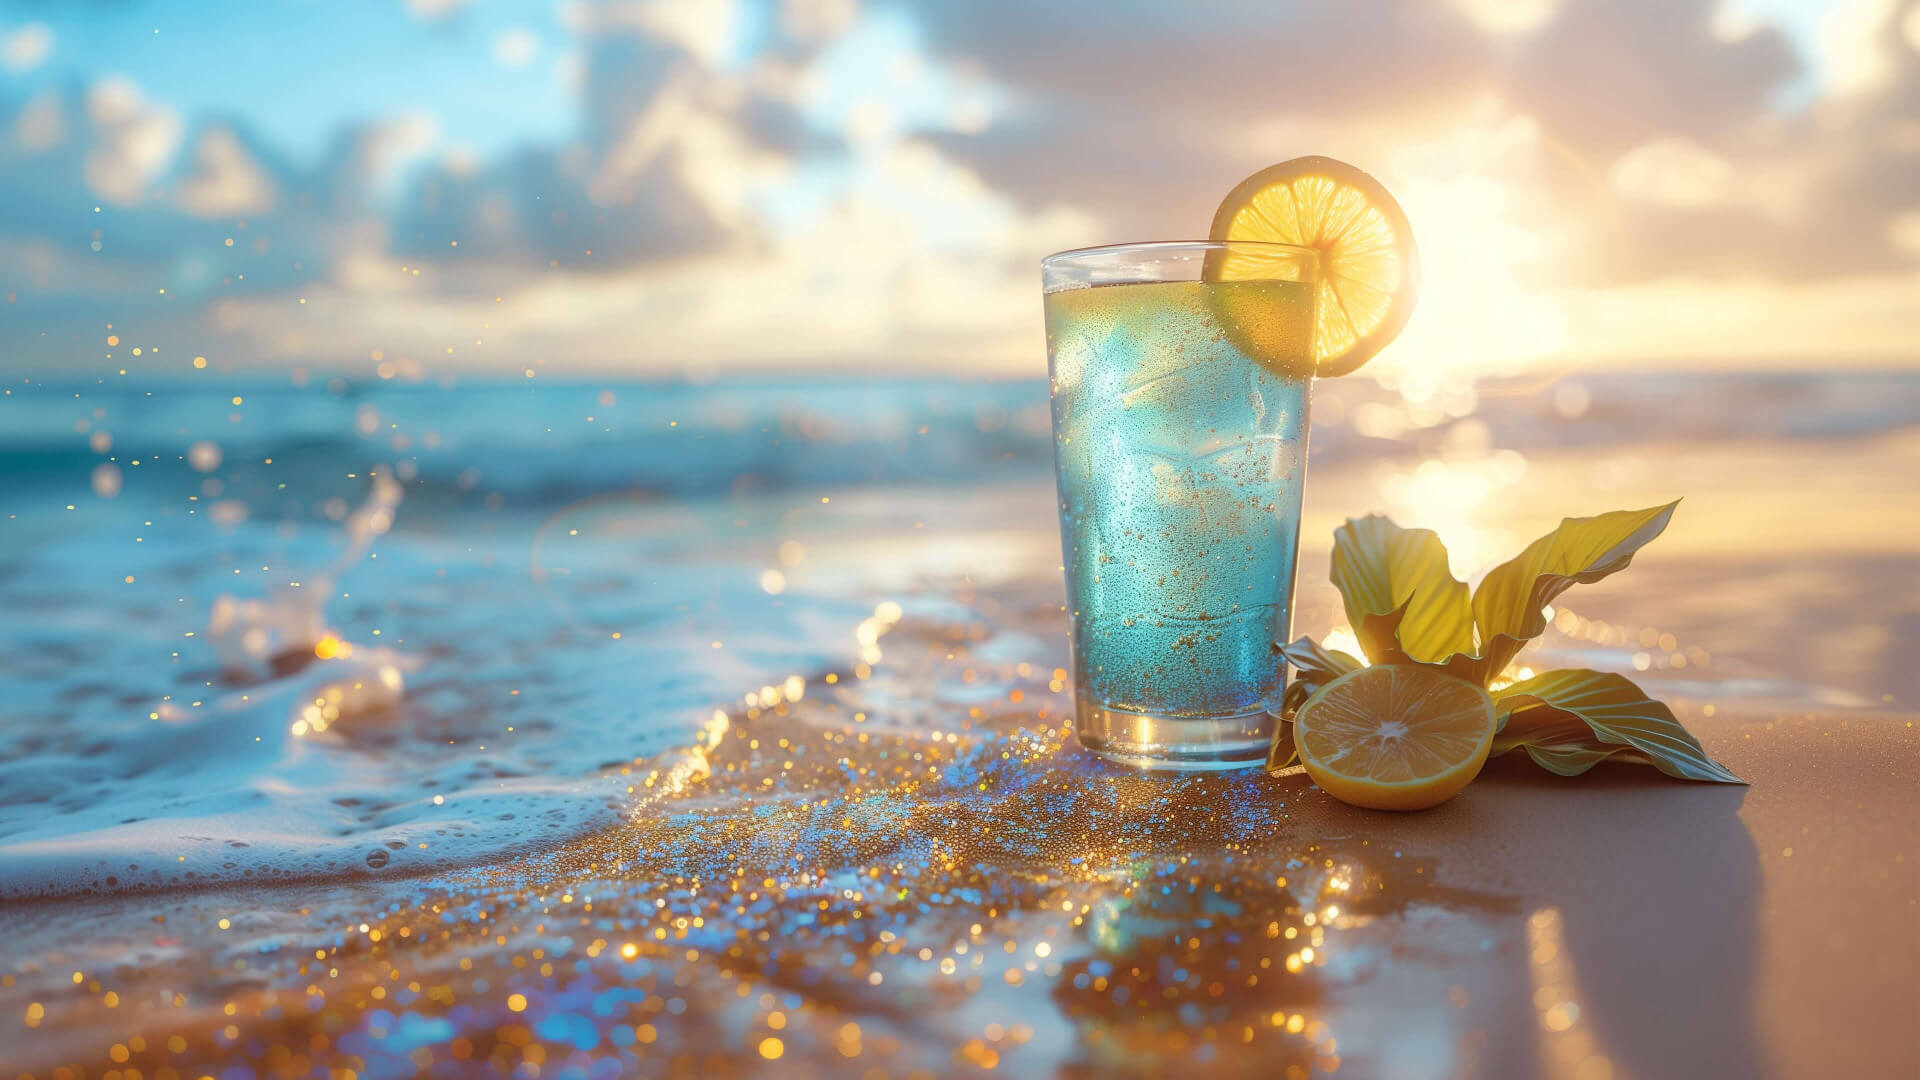 Cold drink on the ocean shore wallpaper 1280x720